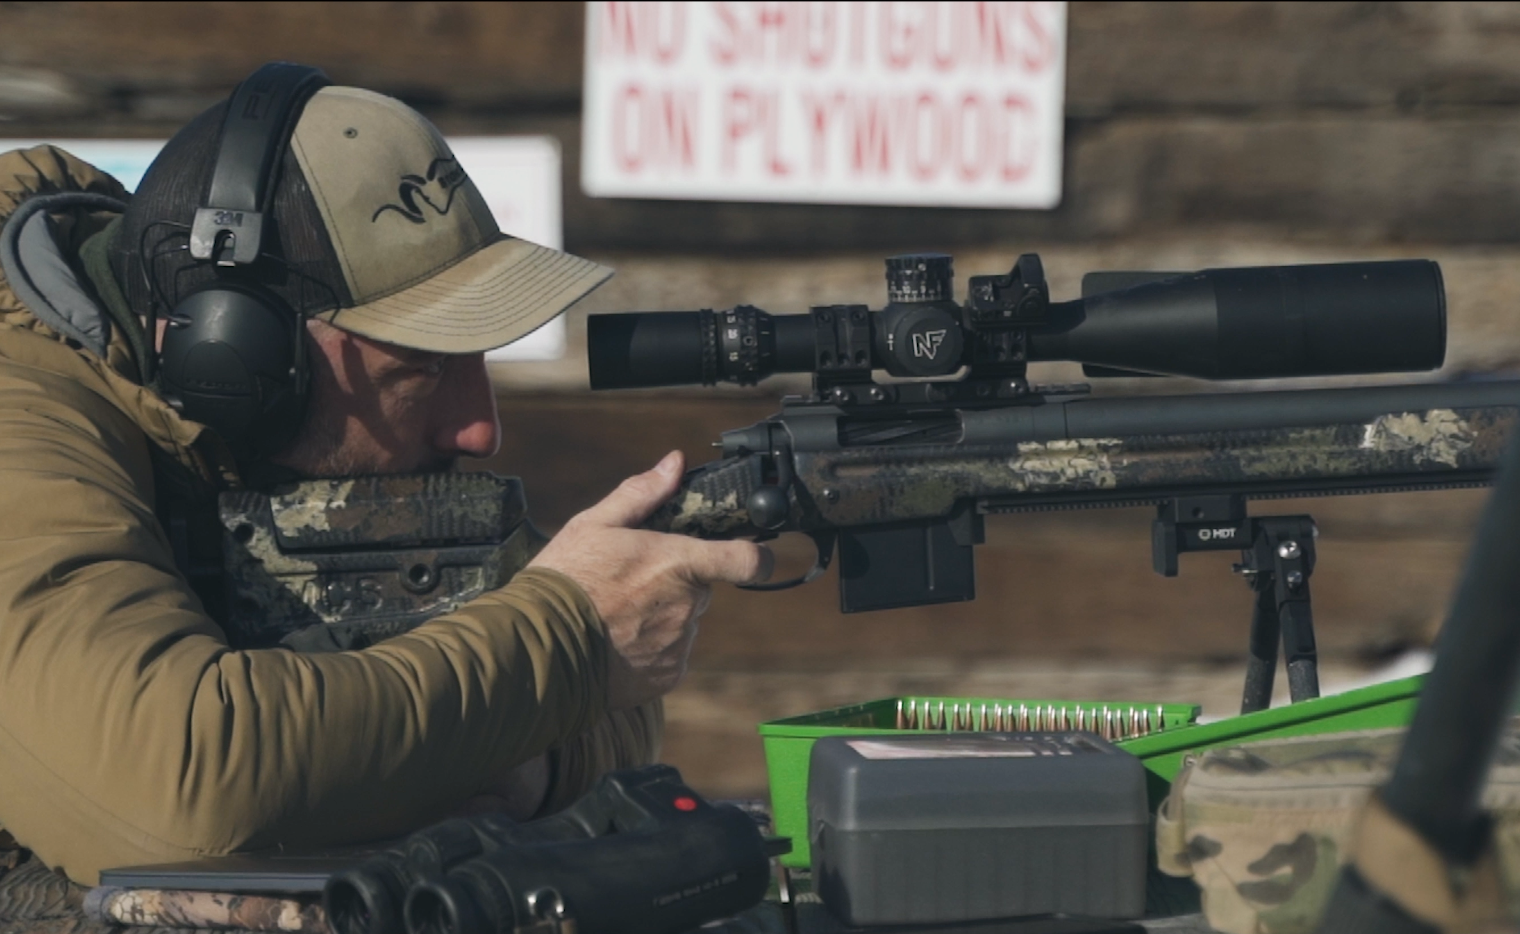 Here's what the modern precision rifle rig looks like. 